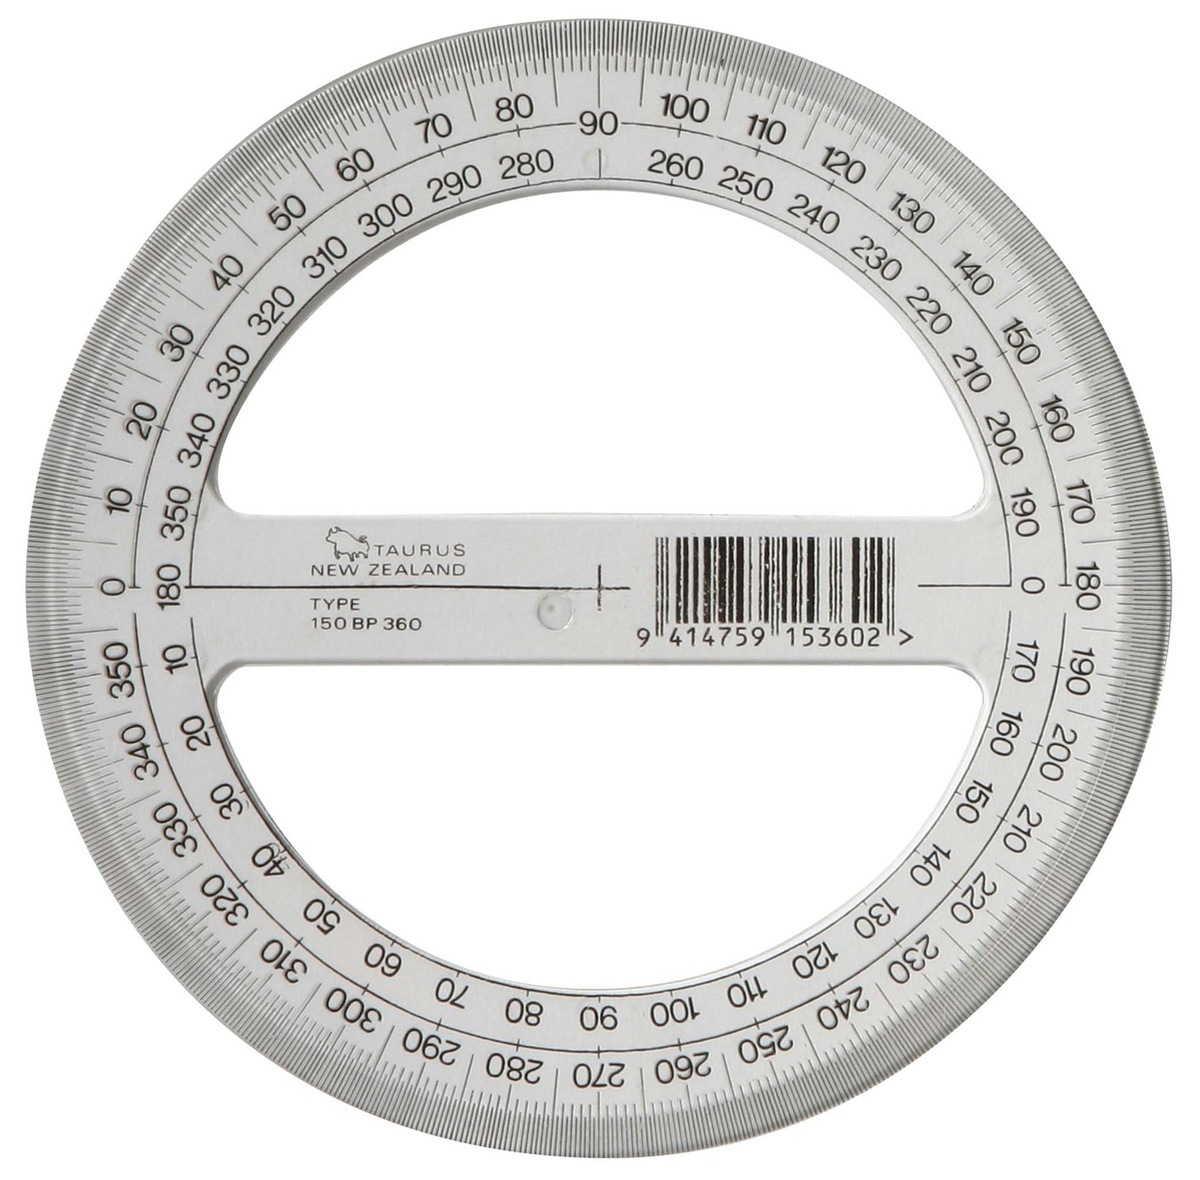 https://storables.com/wp-content/uploads/2023/09/13-amazing-360-degree-protractor-for-2023-1693951104.jpg